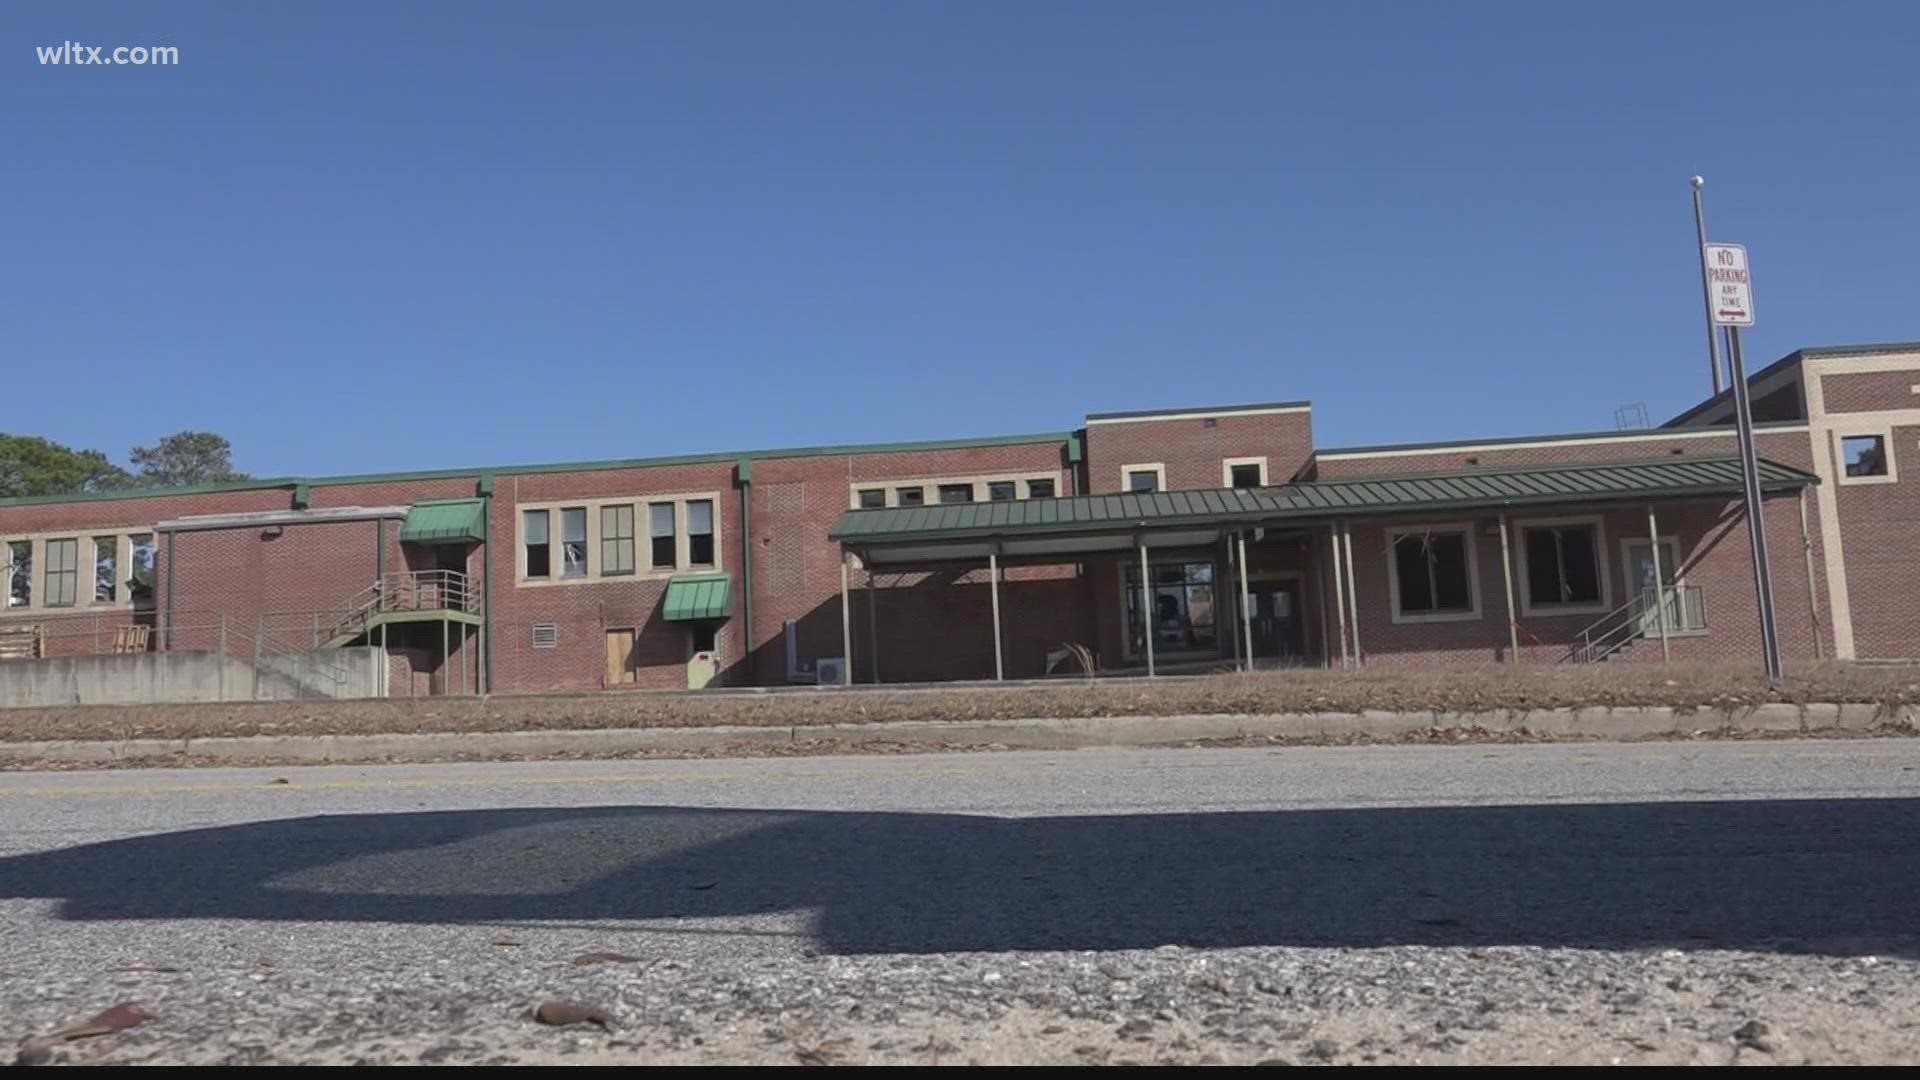 The school in Cayce is being demolished and for those who went to the school, a chance for a keepsake.